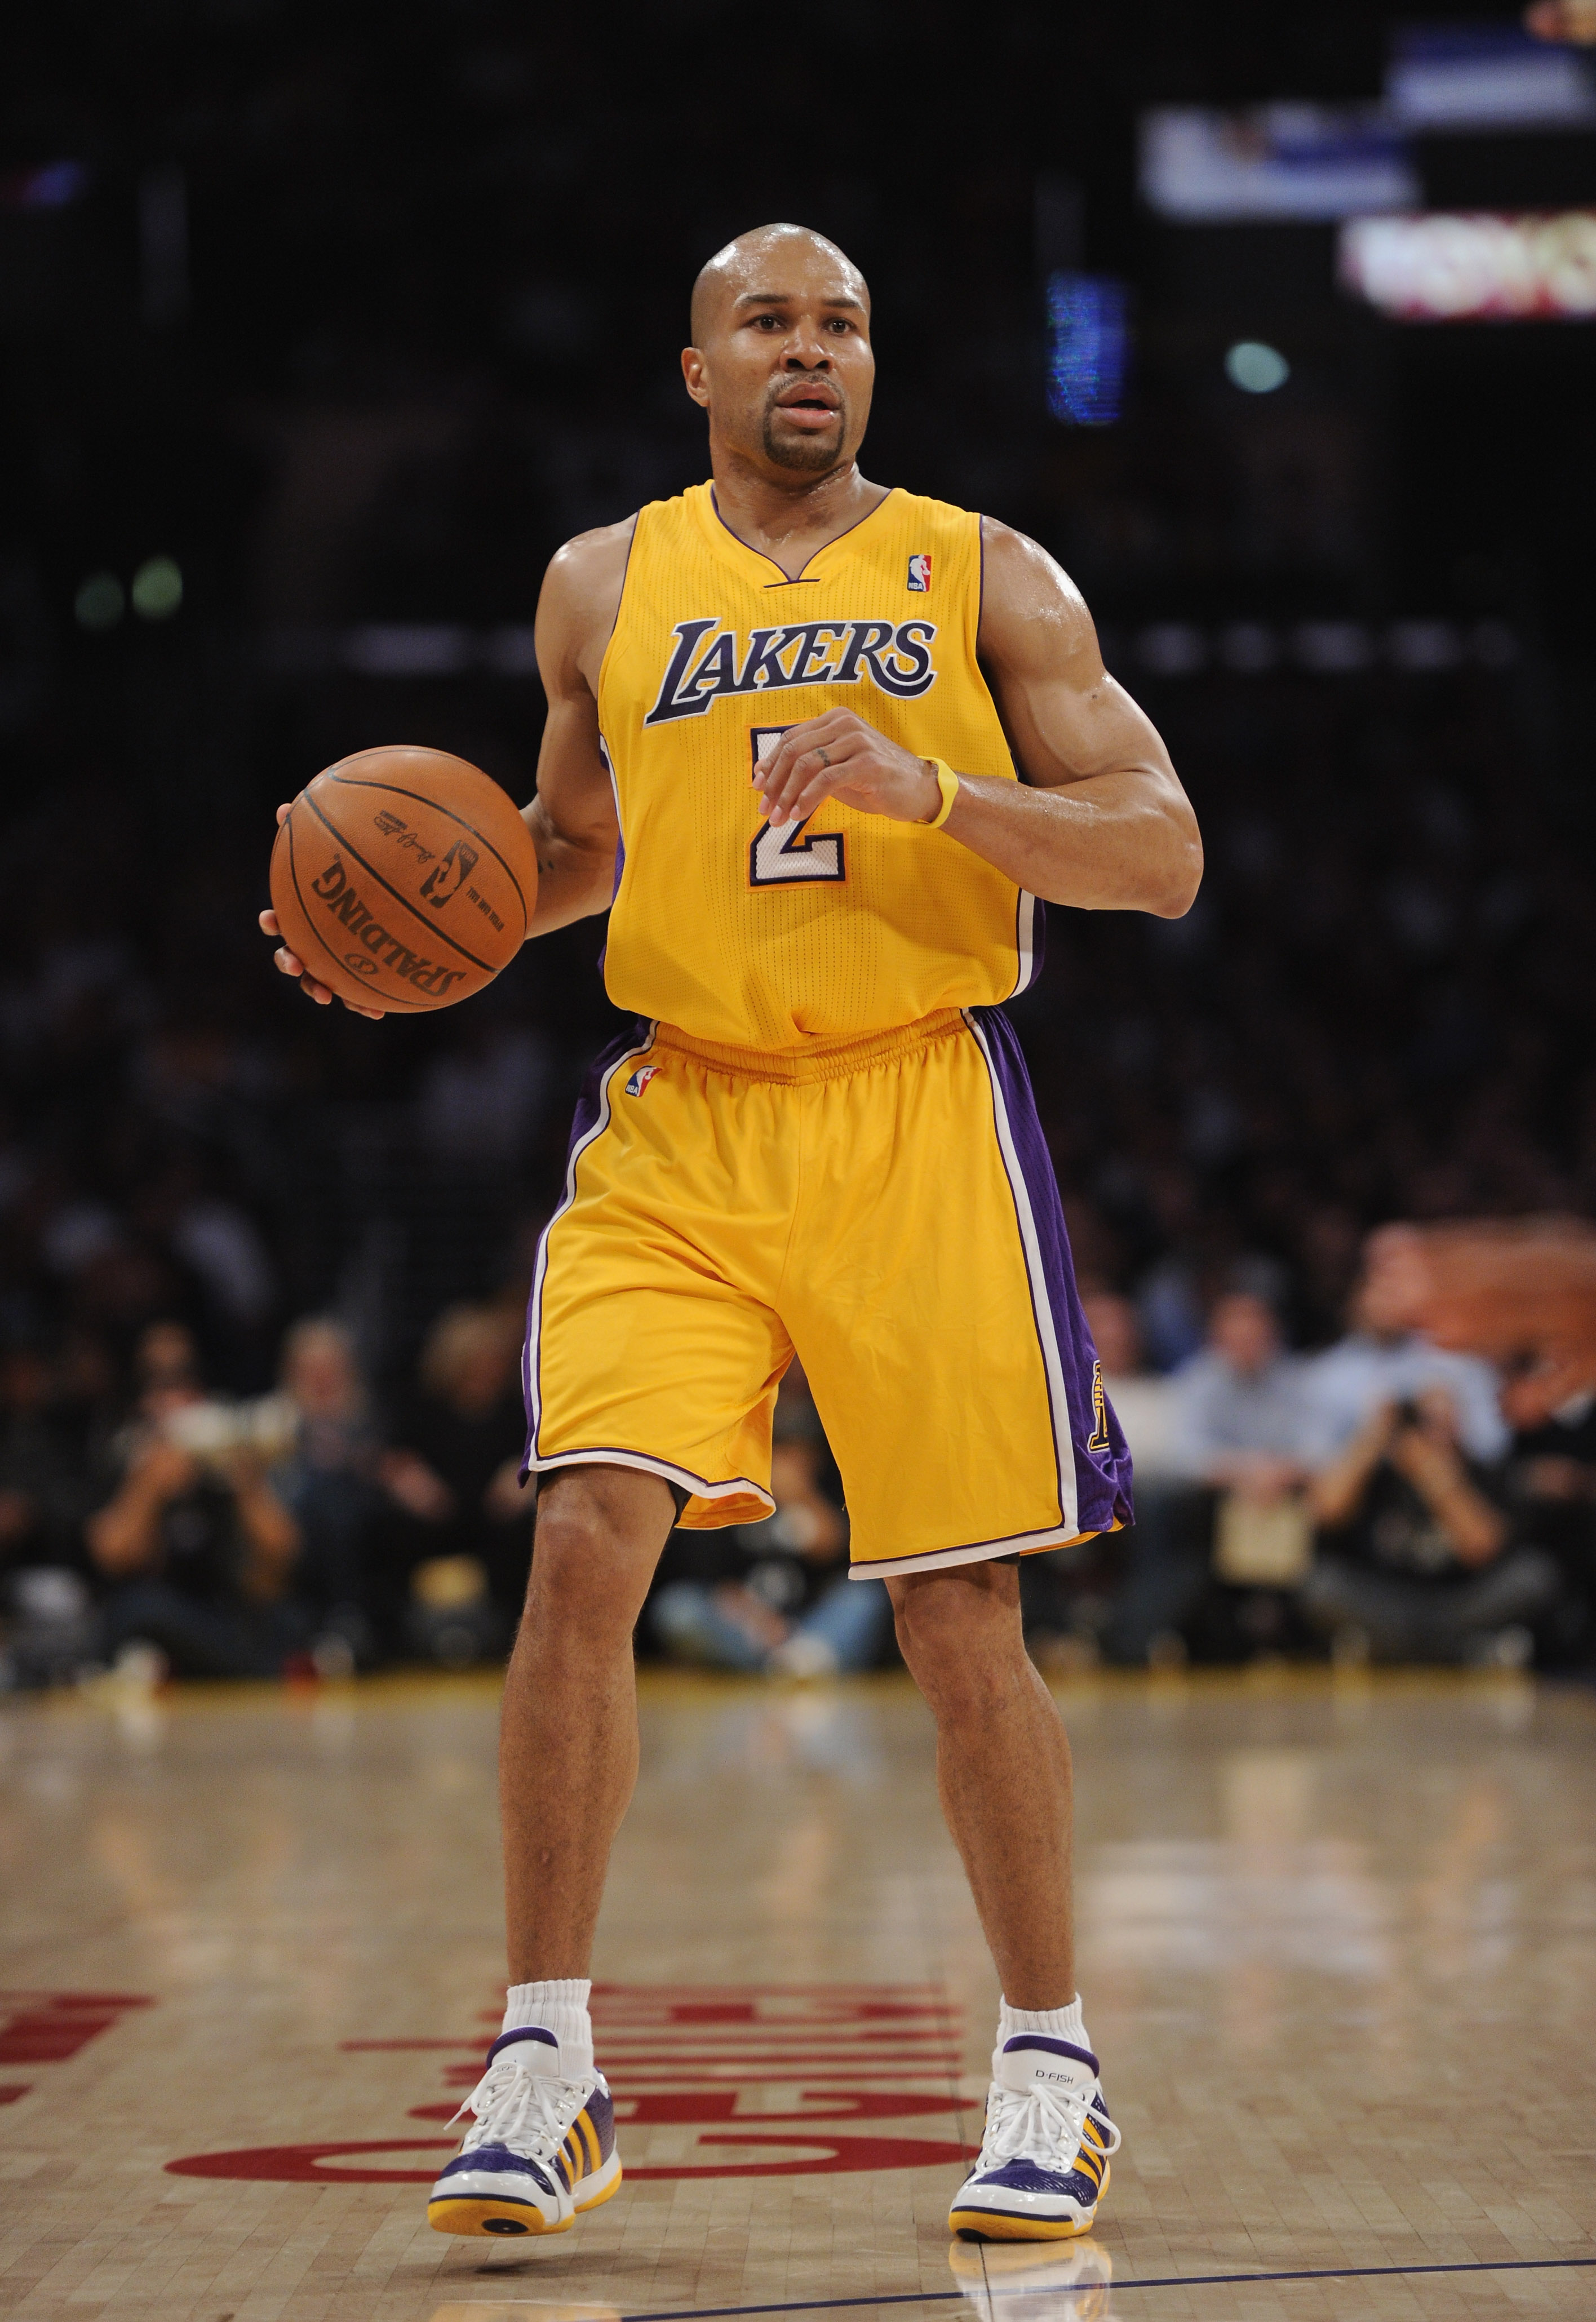 LOS ANGELES, CA - APRIL 12:  Derek Fisher #2 of the Los Angeles Lakers dribbles against the San Antonio Spurs at Staples Center on April 12, 2011 in Los Angeles, California.  NOTE TO USER: User expressly acknowledges and agrees that, by downloading and or